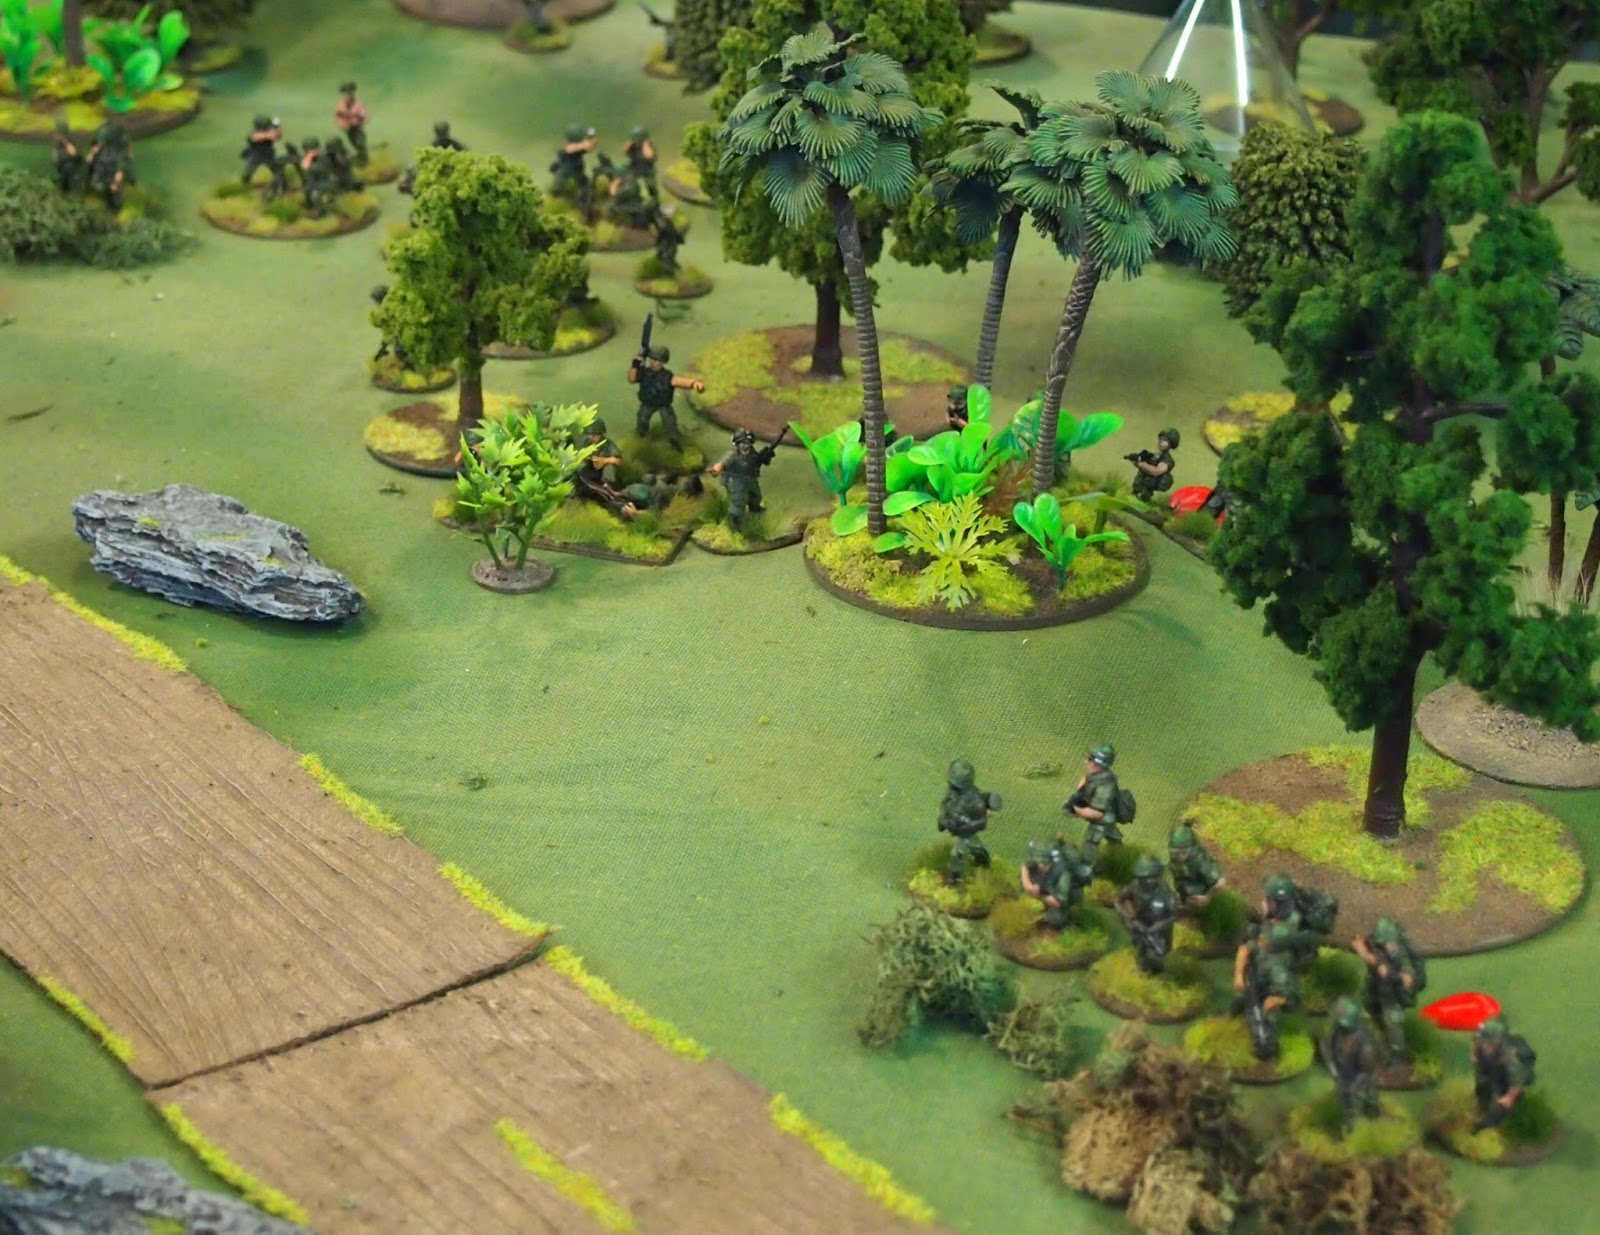 The reformed left flank protecting the Mortar position and HQ